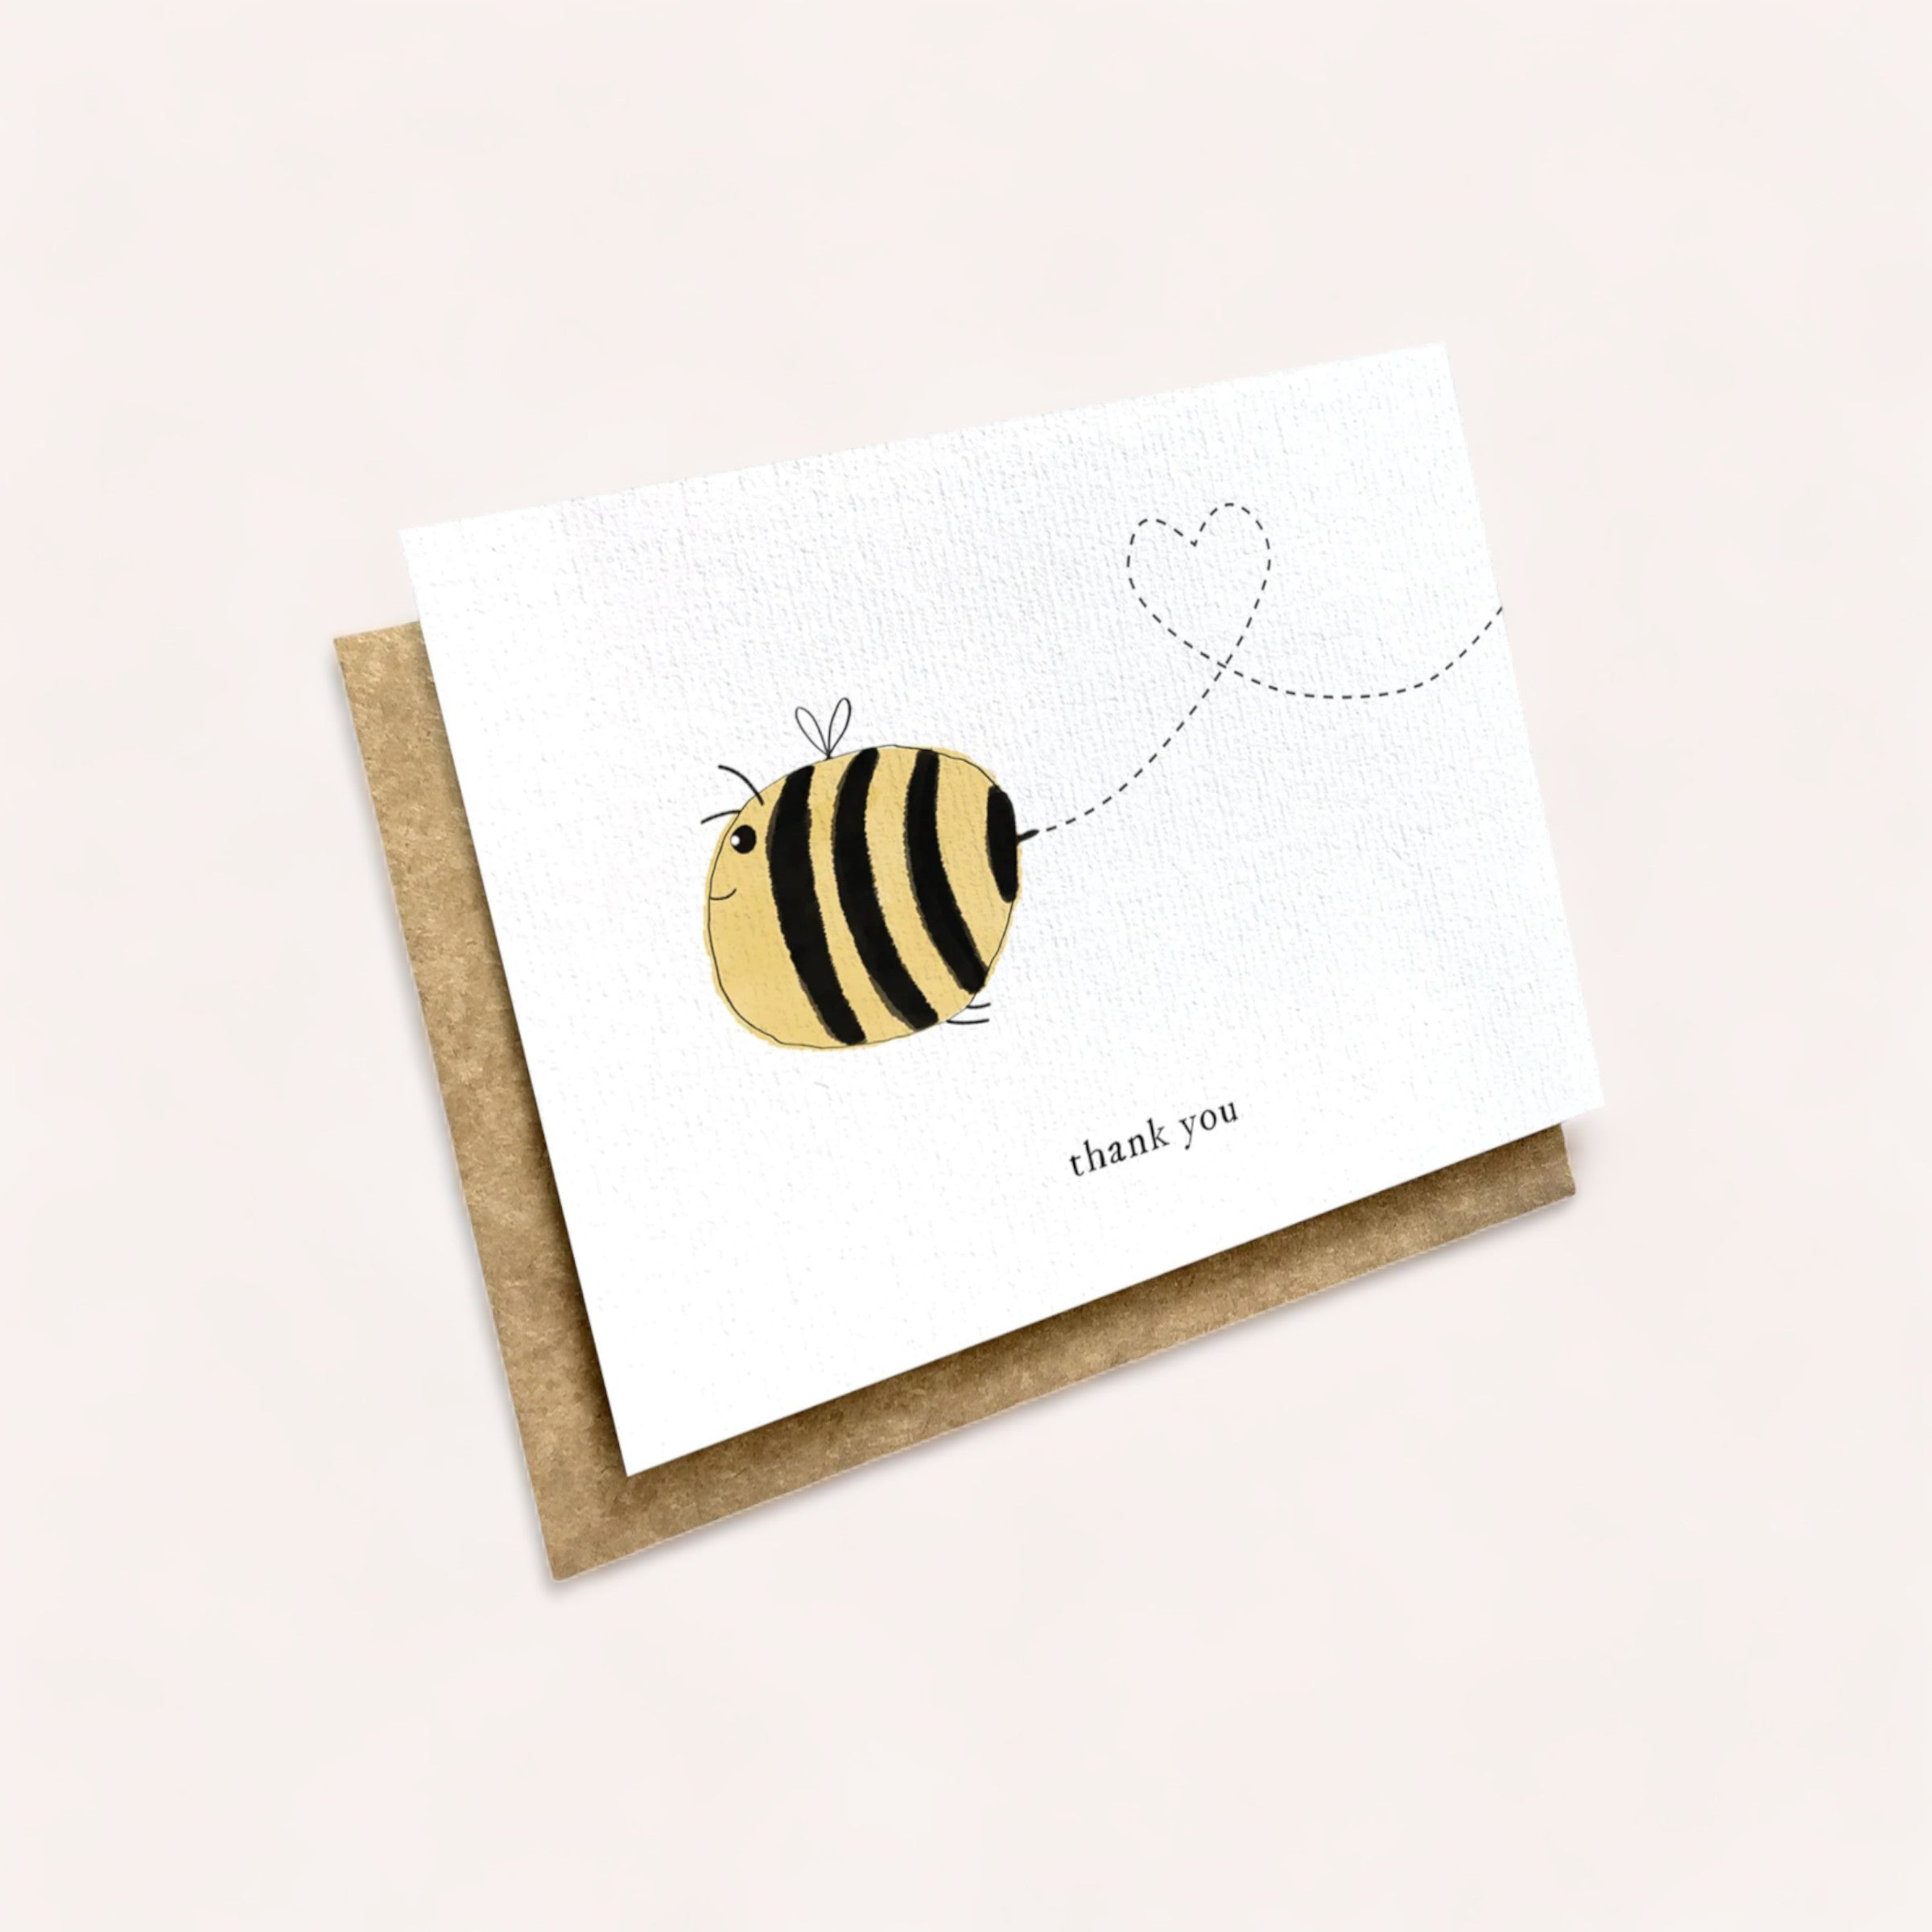 A Bee Thank You Card featuring a whimsical illustration of a bee with a heart-shaped flight trail on a plain background, accompanied by a kraft paper envelope, made by Ink Bomb.